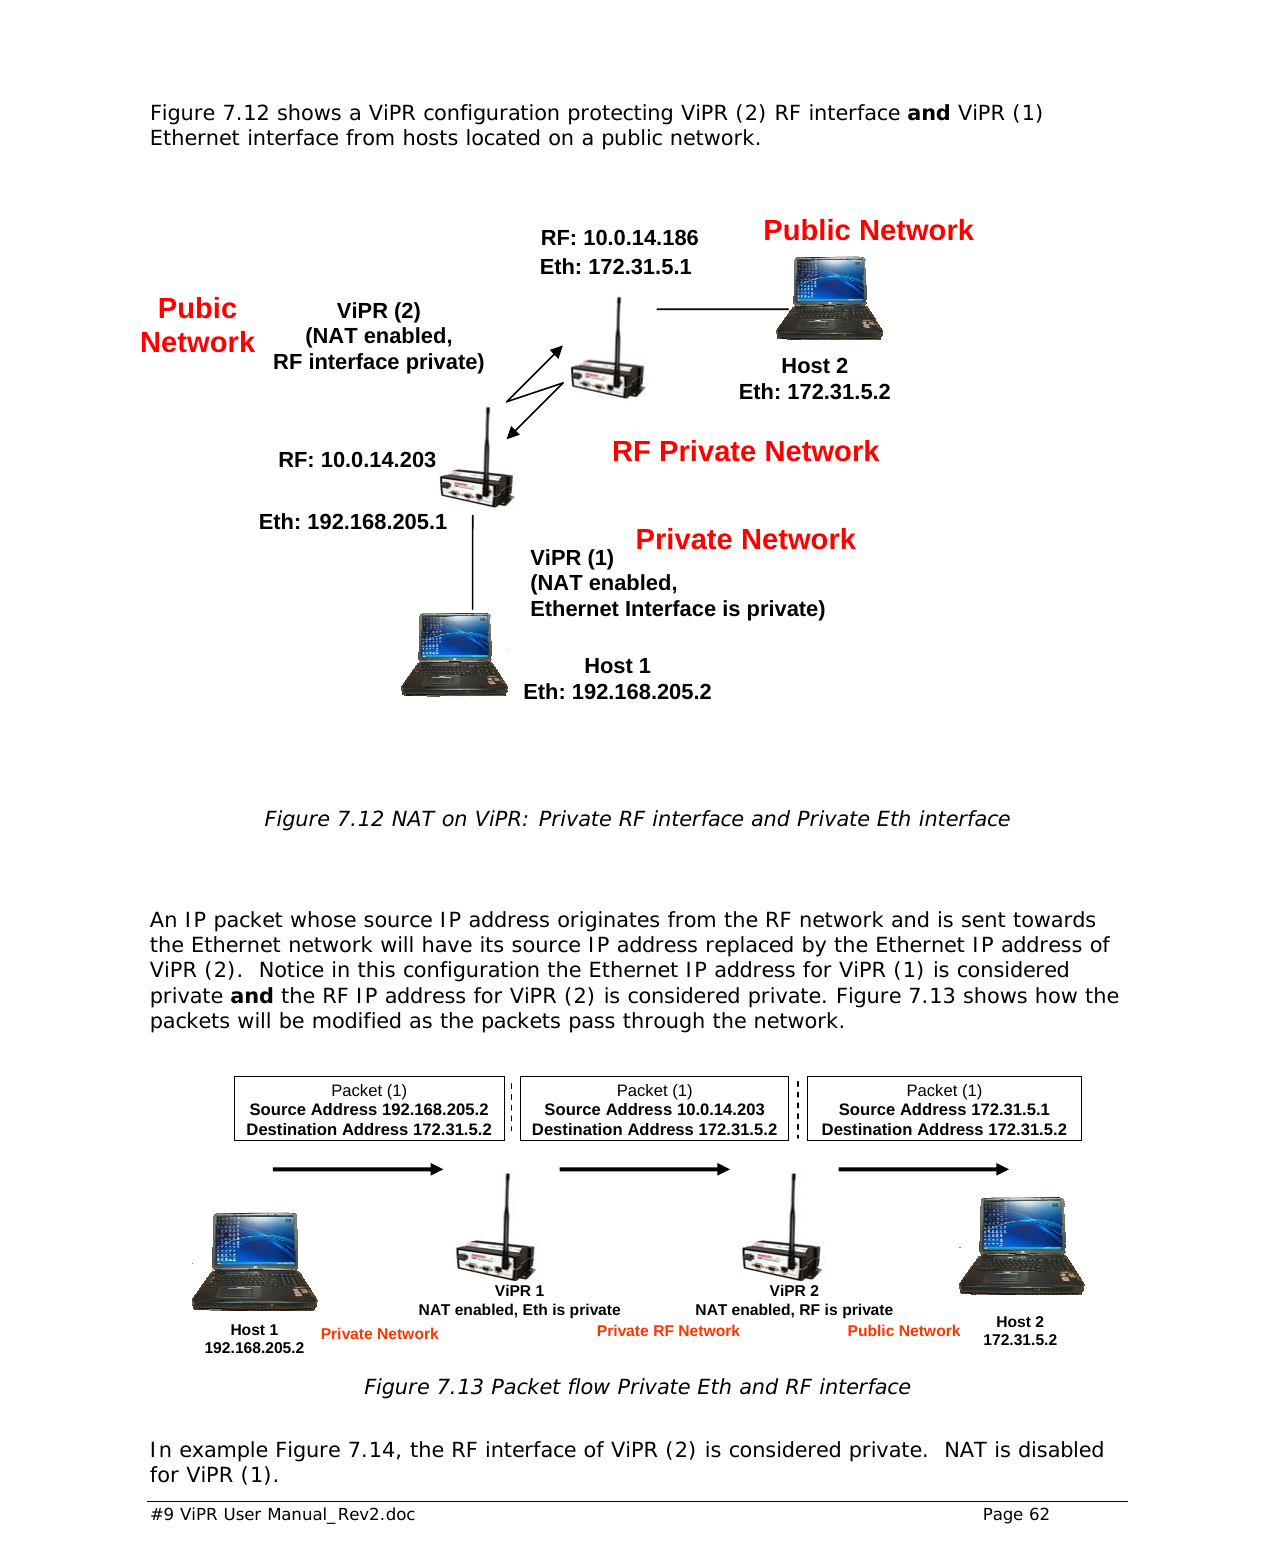  #9 ViPR User Manual_Rev2.doc    Page 62   Figure 7.12 shows a ViPR configuration protecting ViPR (2) RF interface and ViPR (1) Ethernet interface from hosts located on a public network.                  Figure 7.12 NAT on ViPR: Private RF interface and Private Eth interface   An IP packet whose source IP address originates from the RF network and is sent towards the Ethernet network will have its source IP address replaced by the Ethernet IP address of ViPR (2).  Notice in this configuration the Ethernet IP address for ViPR (1) is considered private and the RF IP address for ViPR (2) is considered private. Figure 7.13 shows how the packets will be modified as the packets pass through the network.          Figure 7.13 Packet flow Private Eth and RF interface   In example Figure 7.14, the RF interface of ViPR (2) is considered private.  NAT is disabled for ViPR (1). Eth: 172.31.5.1 RF: 10.0.14.203 RF: 10.0.14.186Eth: 192.168.205.1 Host 2 Eth: 172.31.5.2 ViPR (1) (NAT enabled,  Ethernet Interface is private) ViPR (2) (NAT enabled, RF interface private) Private NetworkHost 1 Eth: 192.168.205.2 Public Network Pubic Network RF Private NetworkPacket (1) Source Address 192.168.205.2 Destination Address 172.31.5.2 Packet (1) Source Address 10.0.14.203 Destination Address 172.31.5.2Packet (1) Source Address 172.31.5.1 Destination Address 172.31.5.2Host 1  192.168.205.2 Host 2 172.31.5.2 ViPR 1NAT enabled, Eth is private ViPR 2NAT enabled, RF is private Private Network  Private RF Network  Public Network 